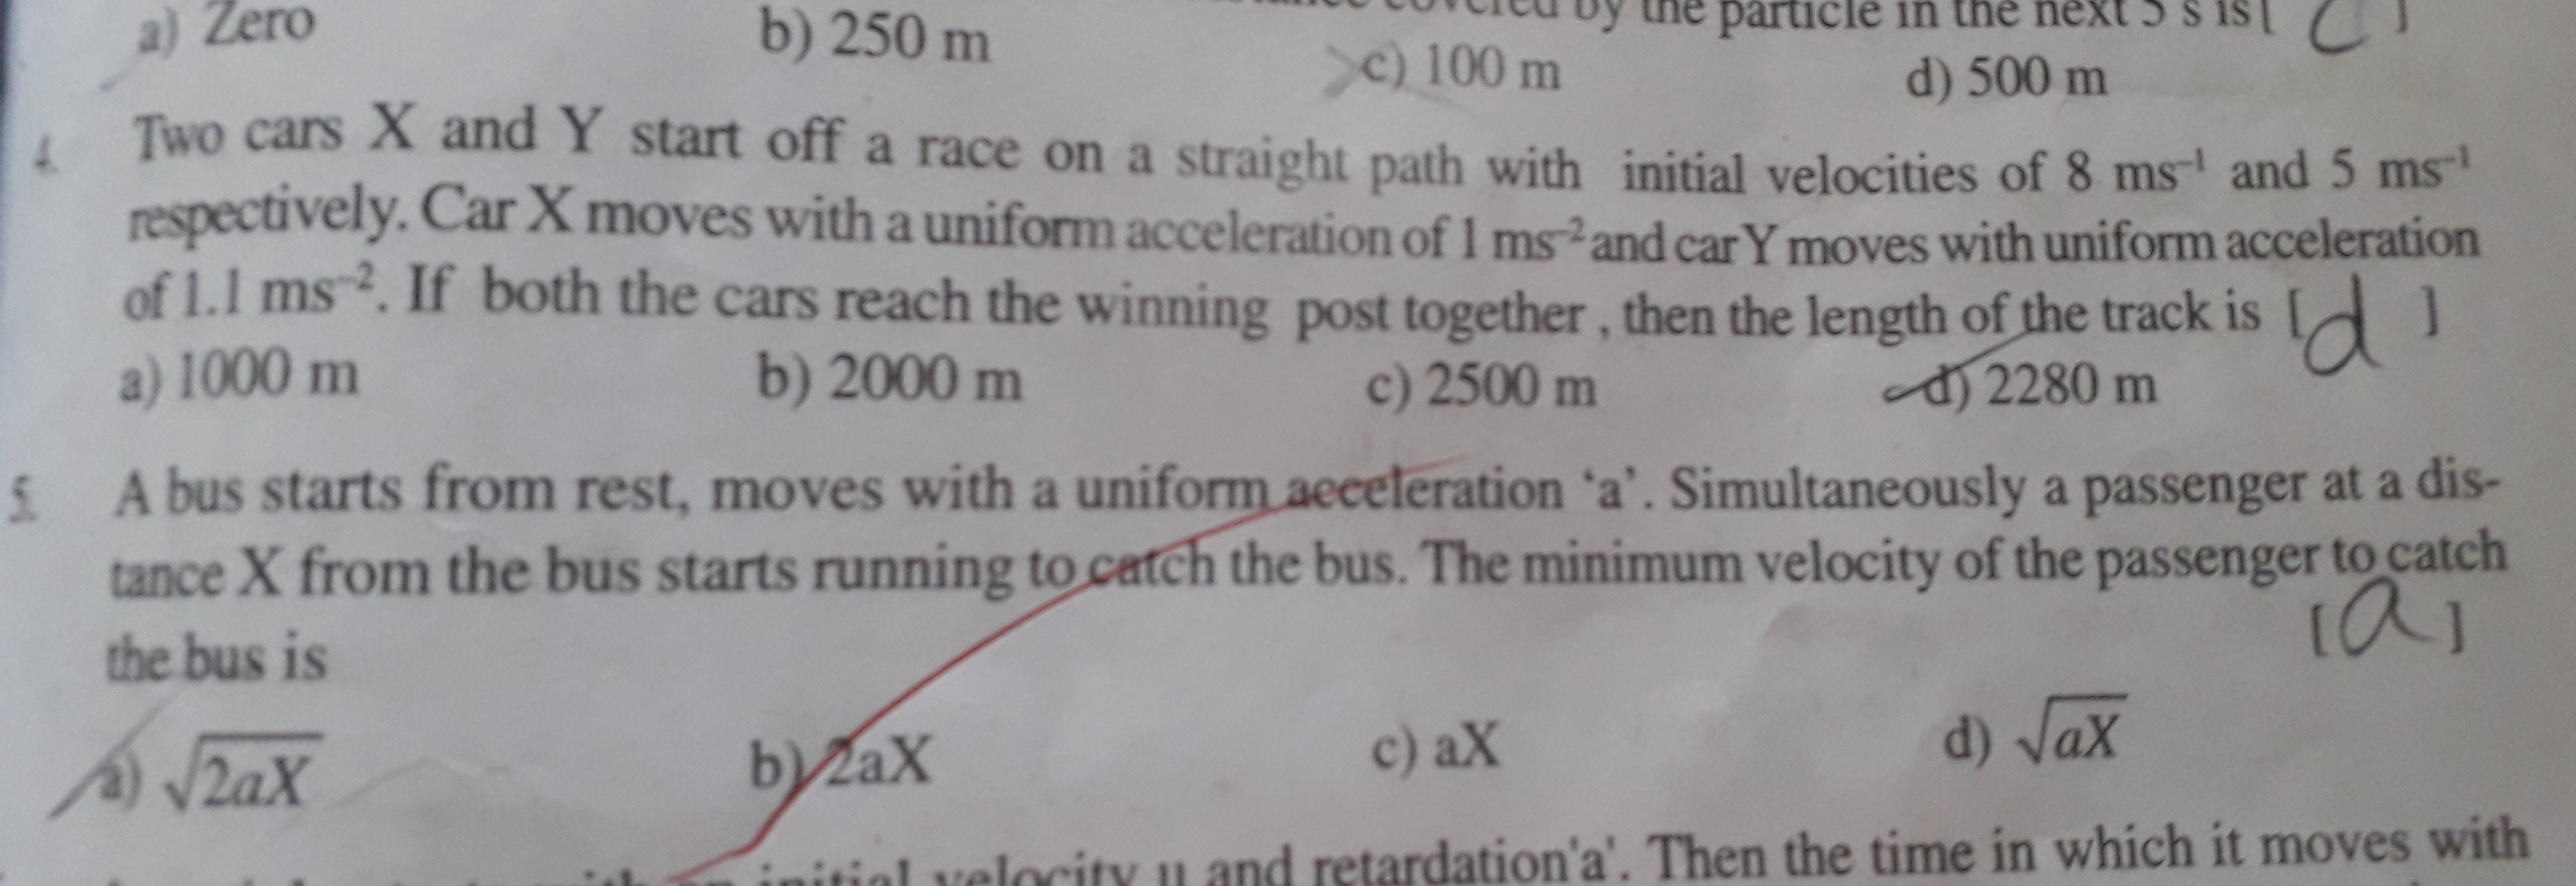 A bus starts from rest, moves with a uniform aeceteration ' a '. Simul